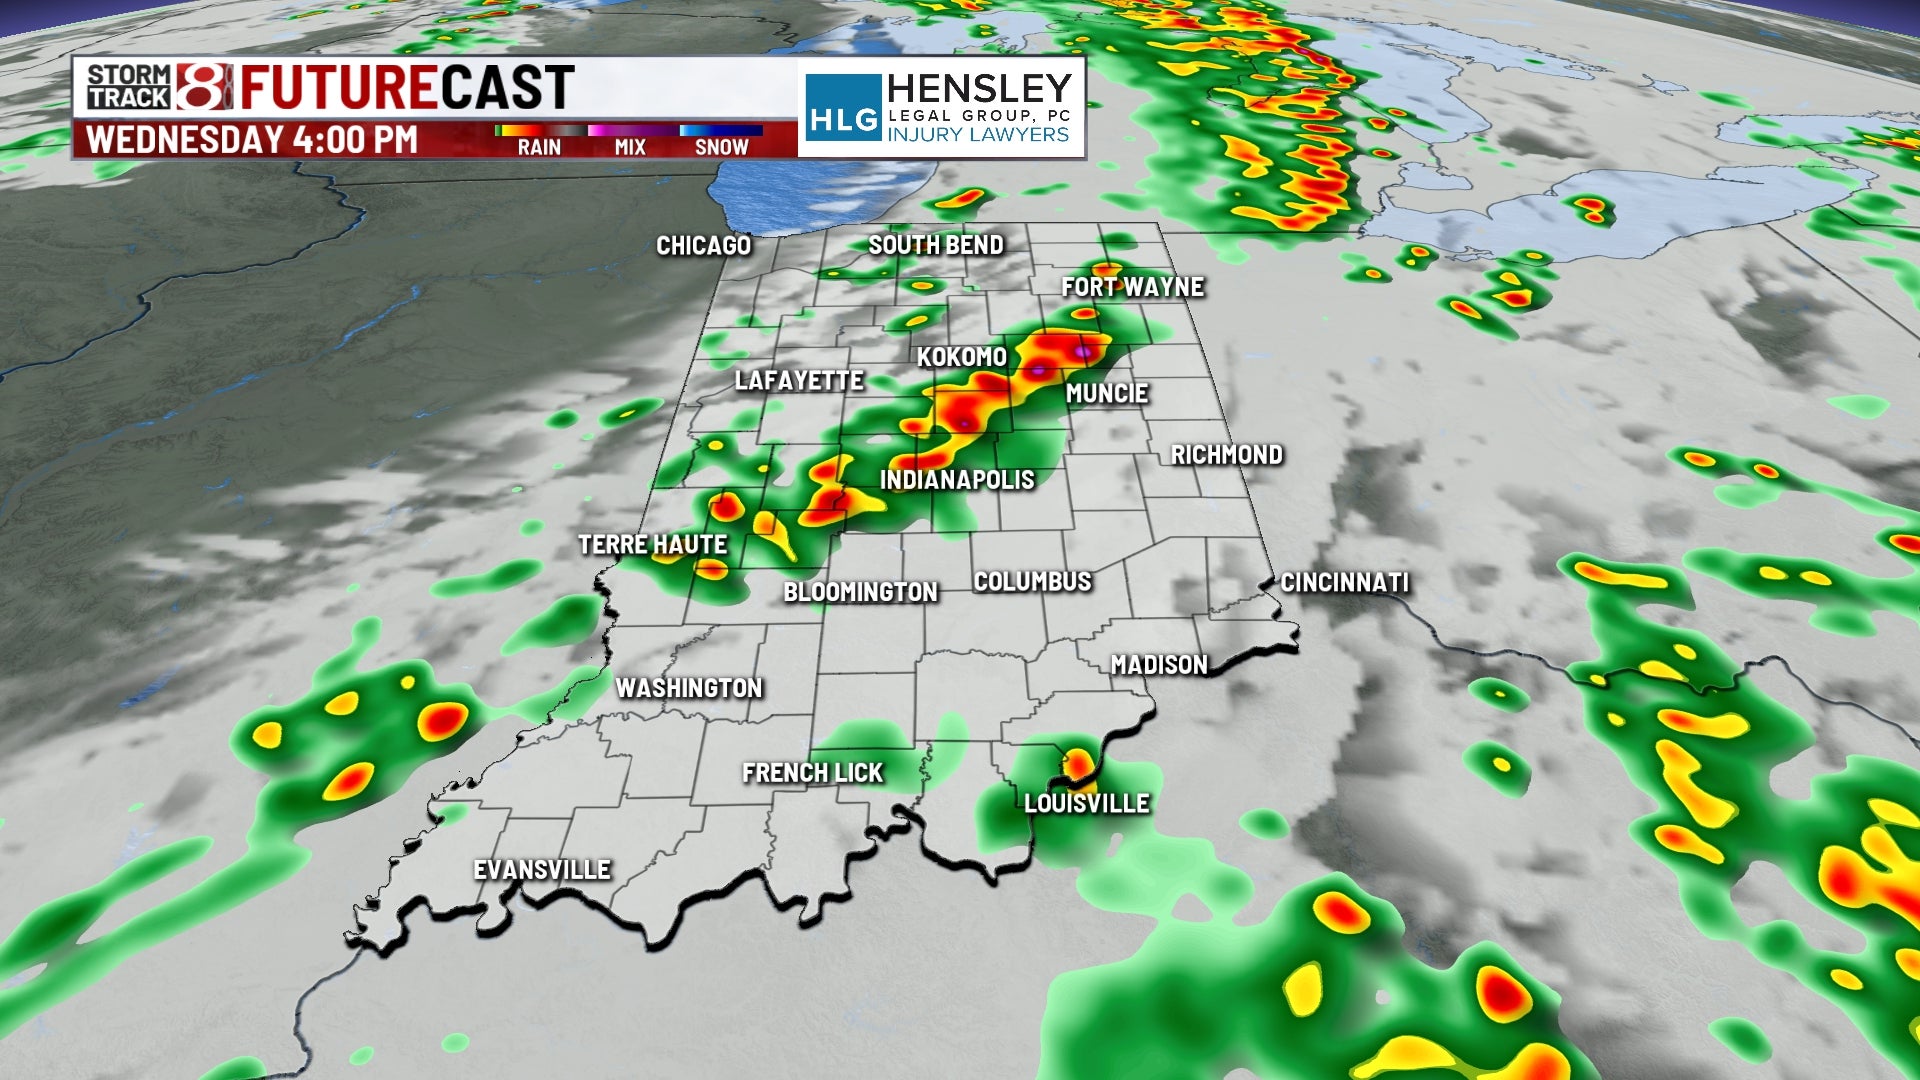 Very humid Wednesday with afternoon storms